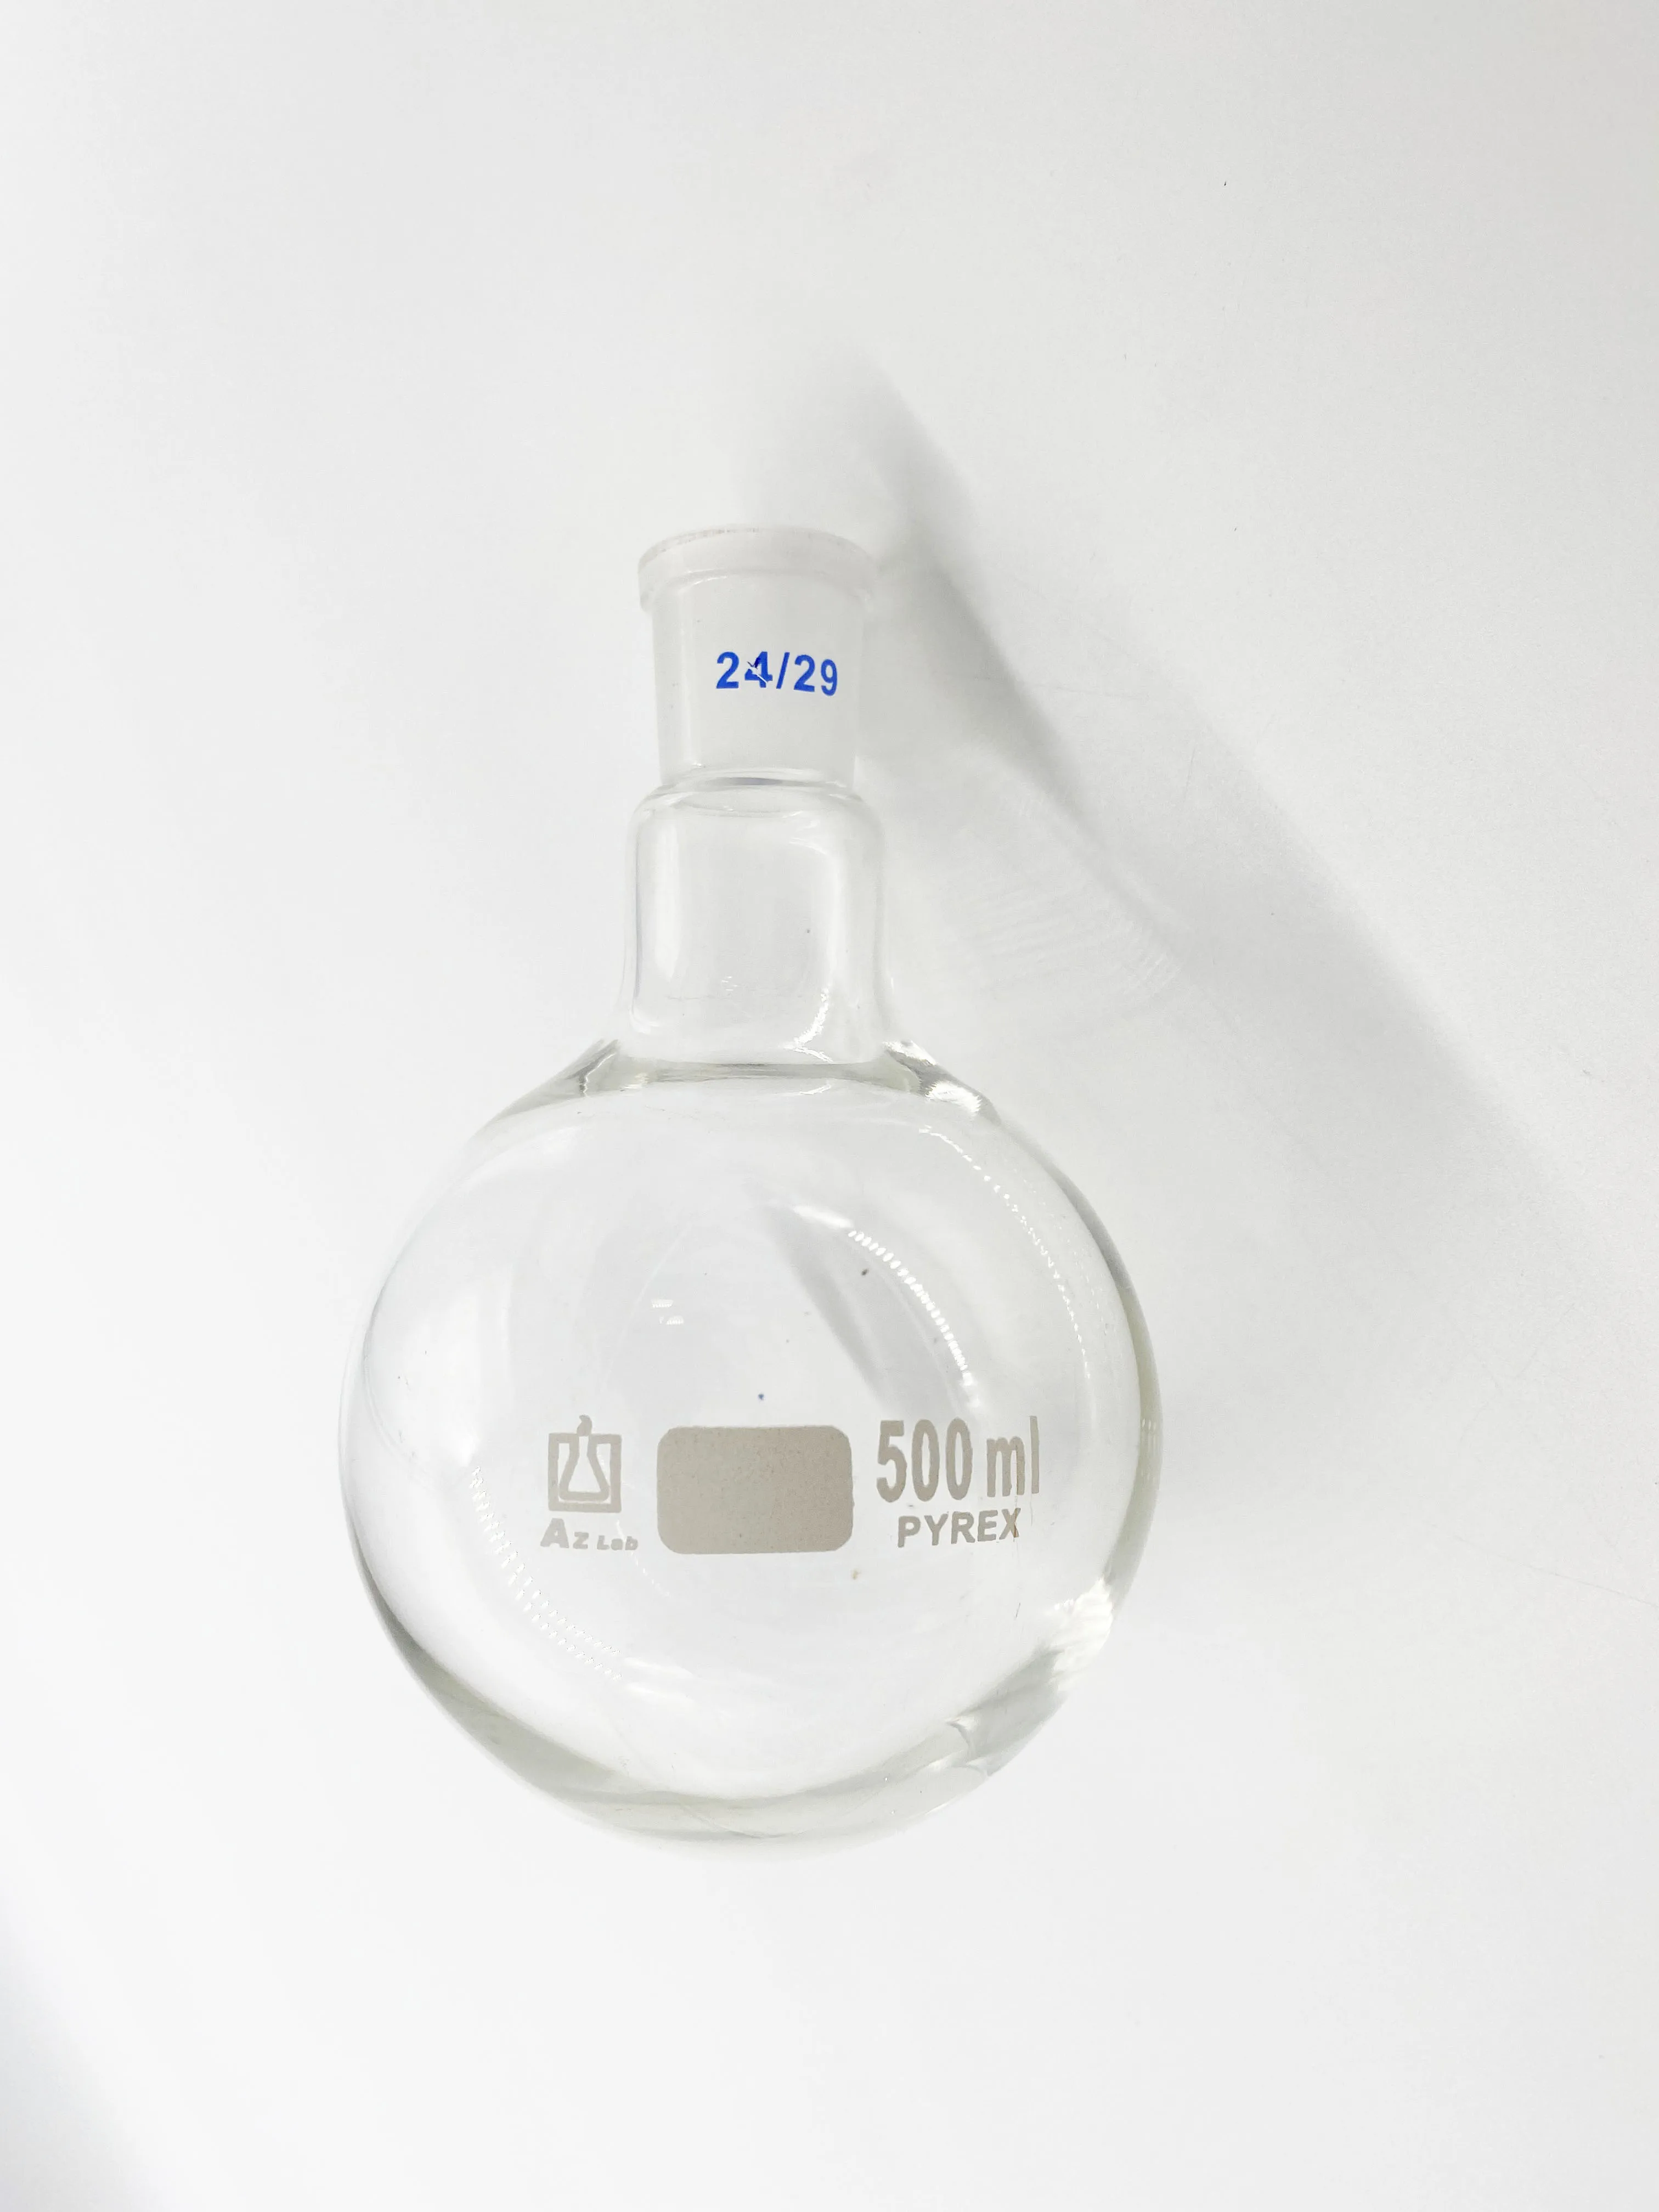 
Guide Medlab Laboratory Glass 150ml Conical Flask with Upper Side Tube 